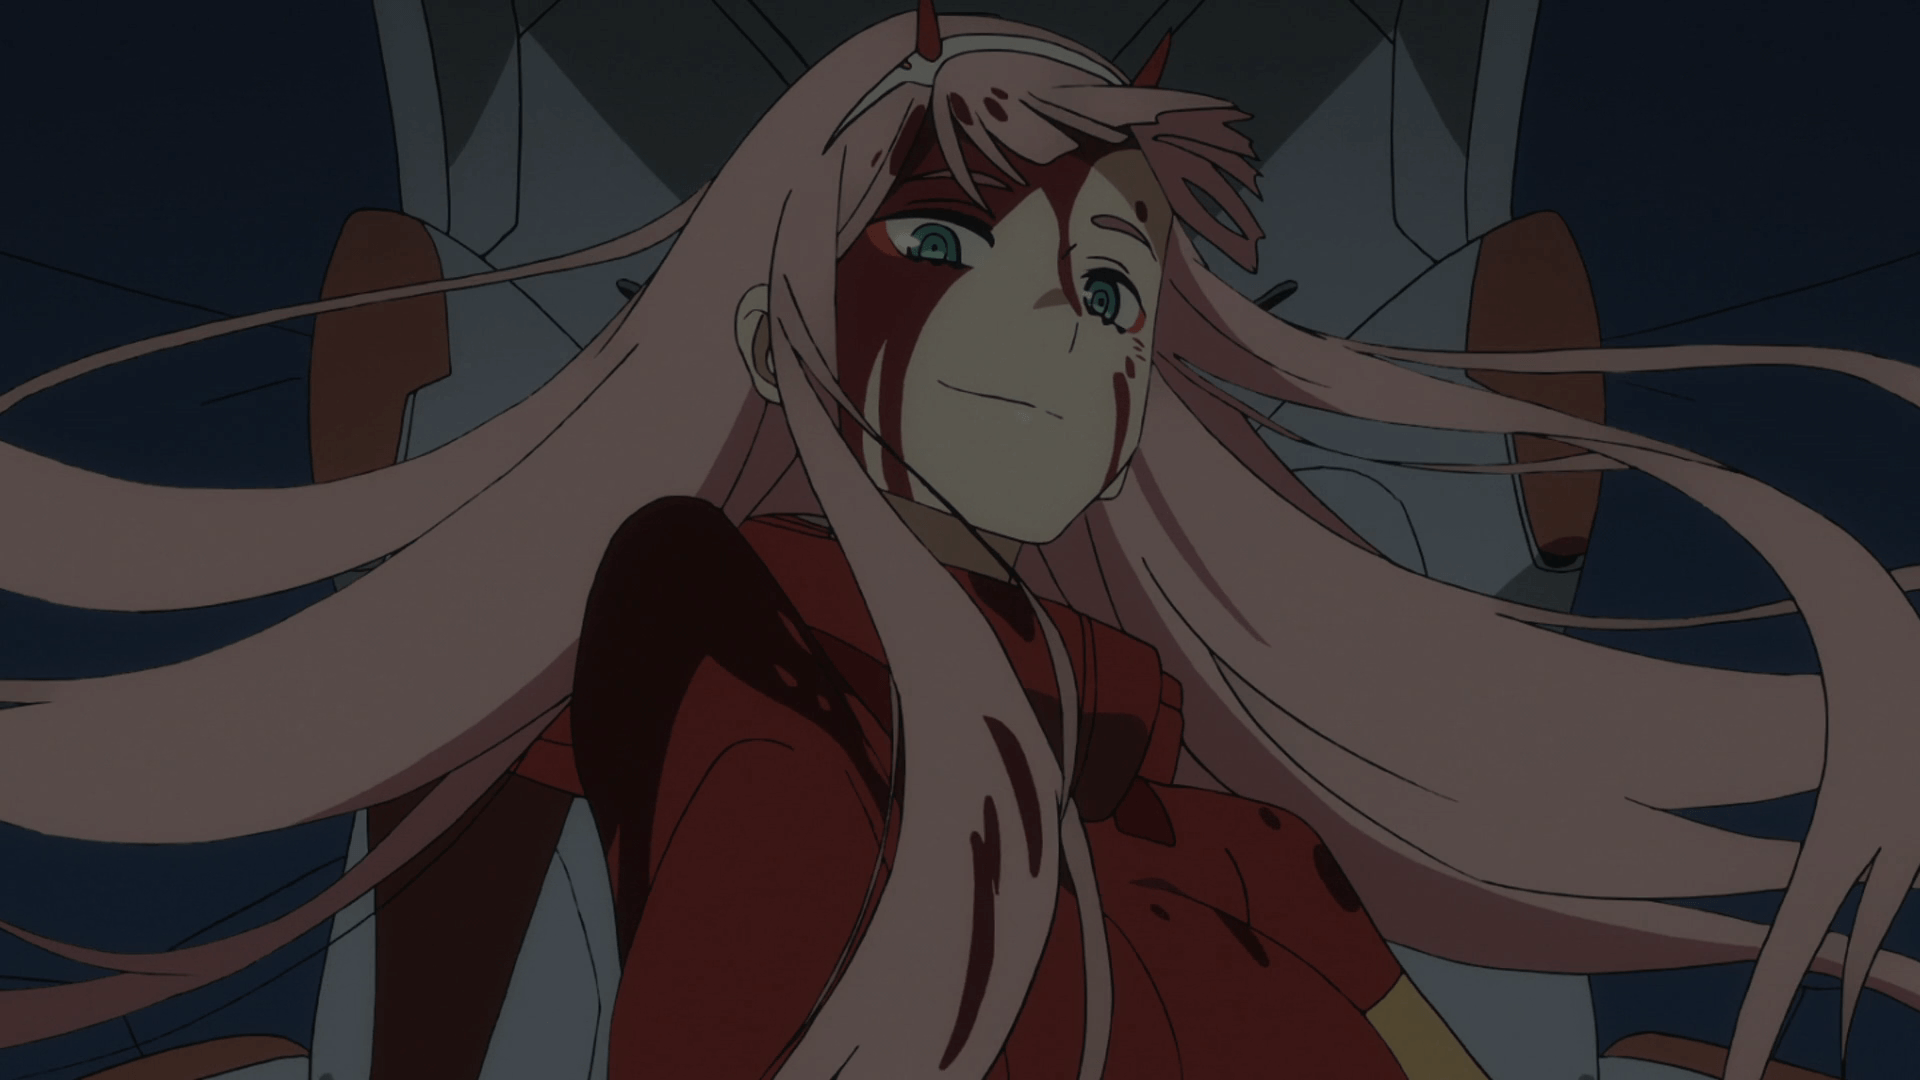 Darling in the Franxx Review. A Piece of Anime